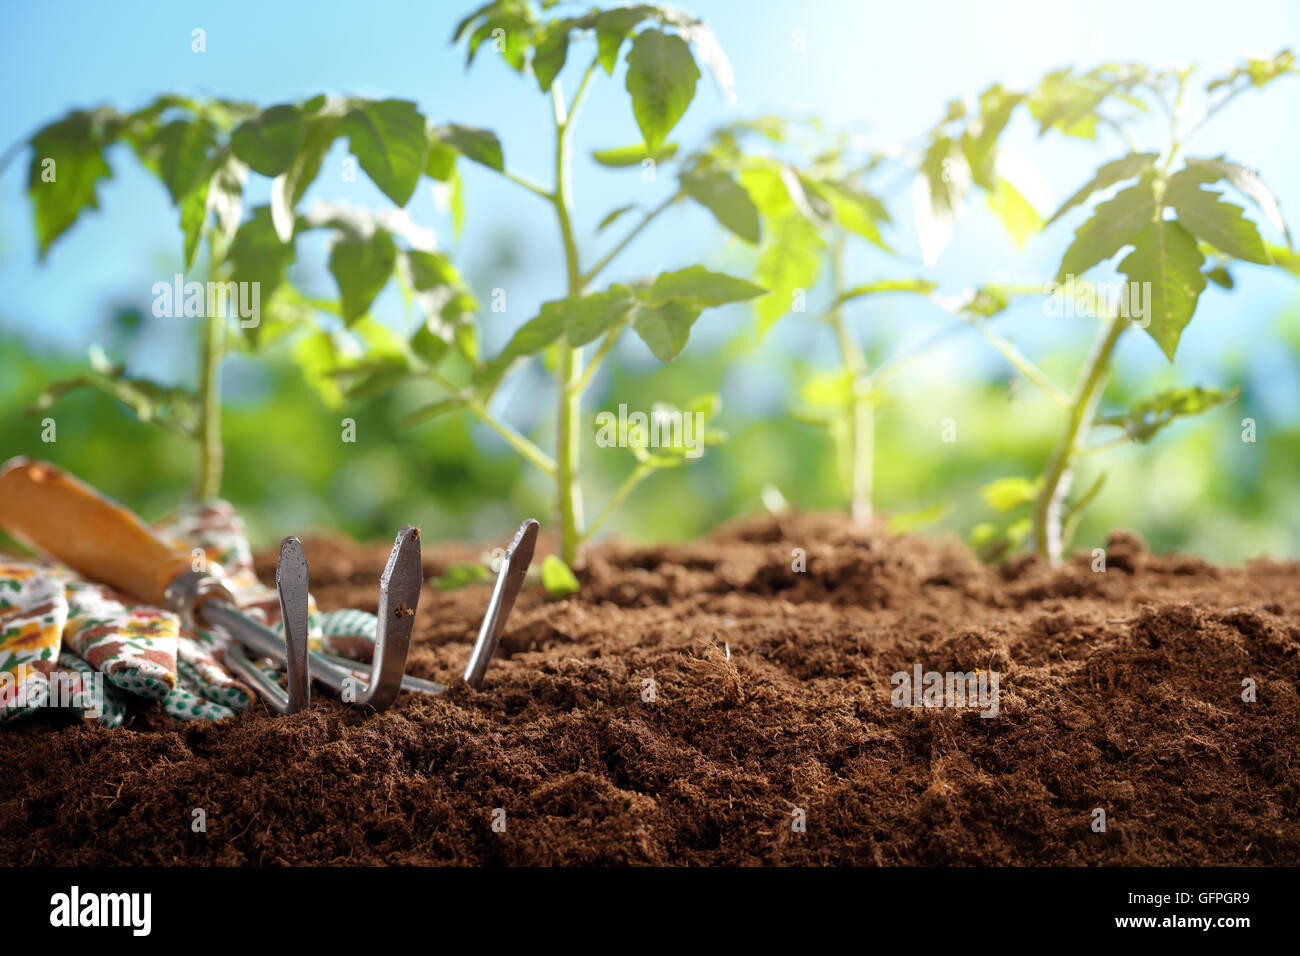 Gardening tools and tomato seedlings in the field Stock Photo